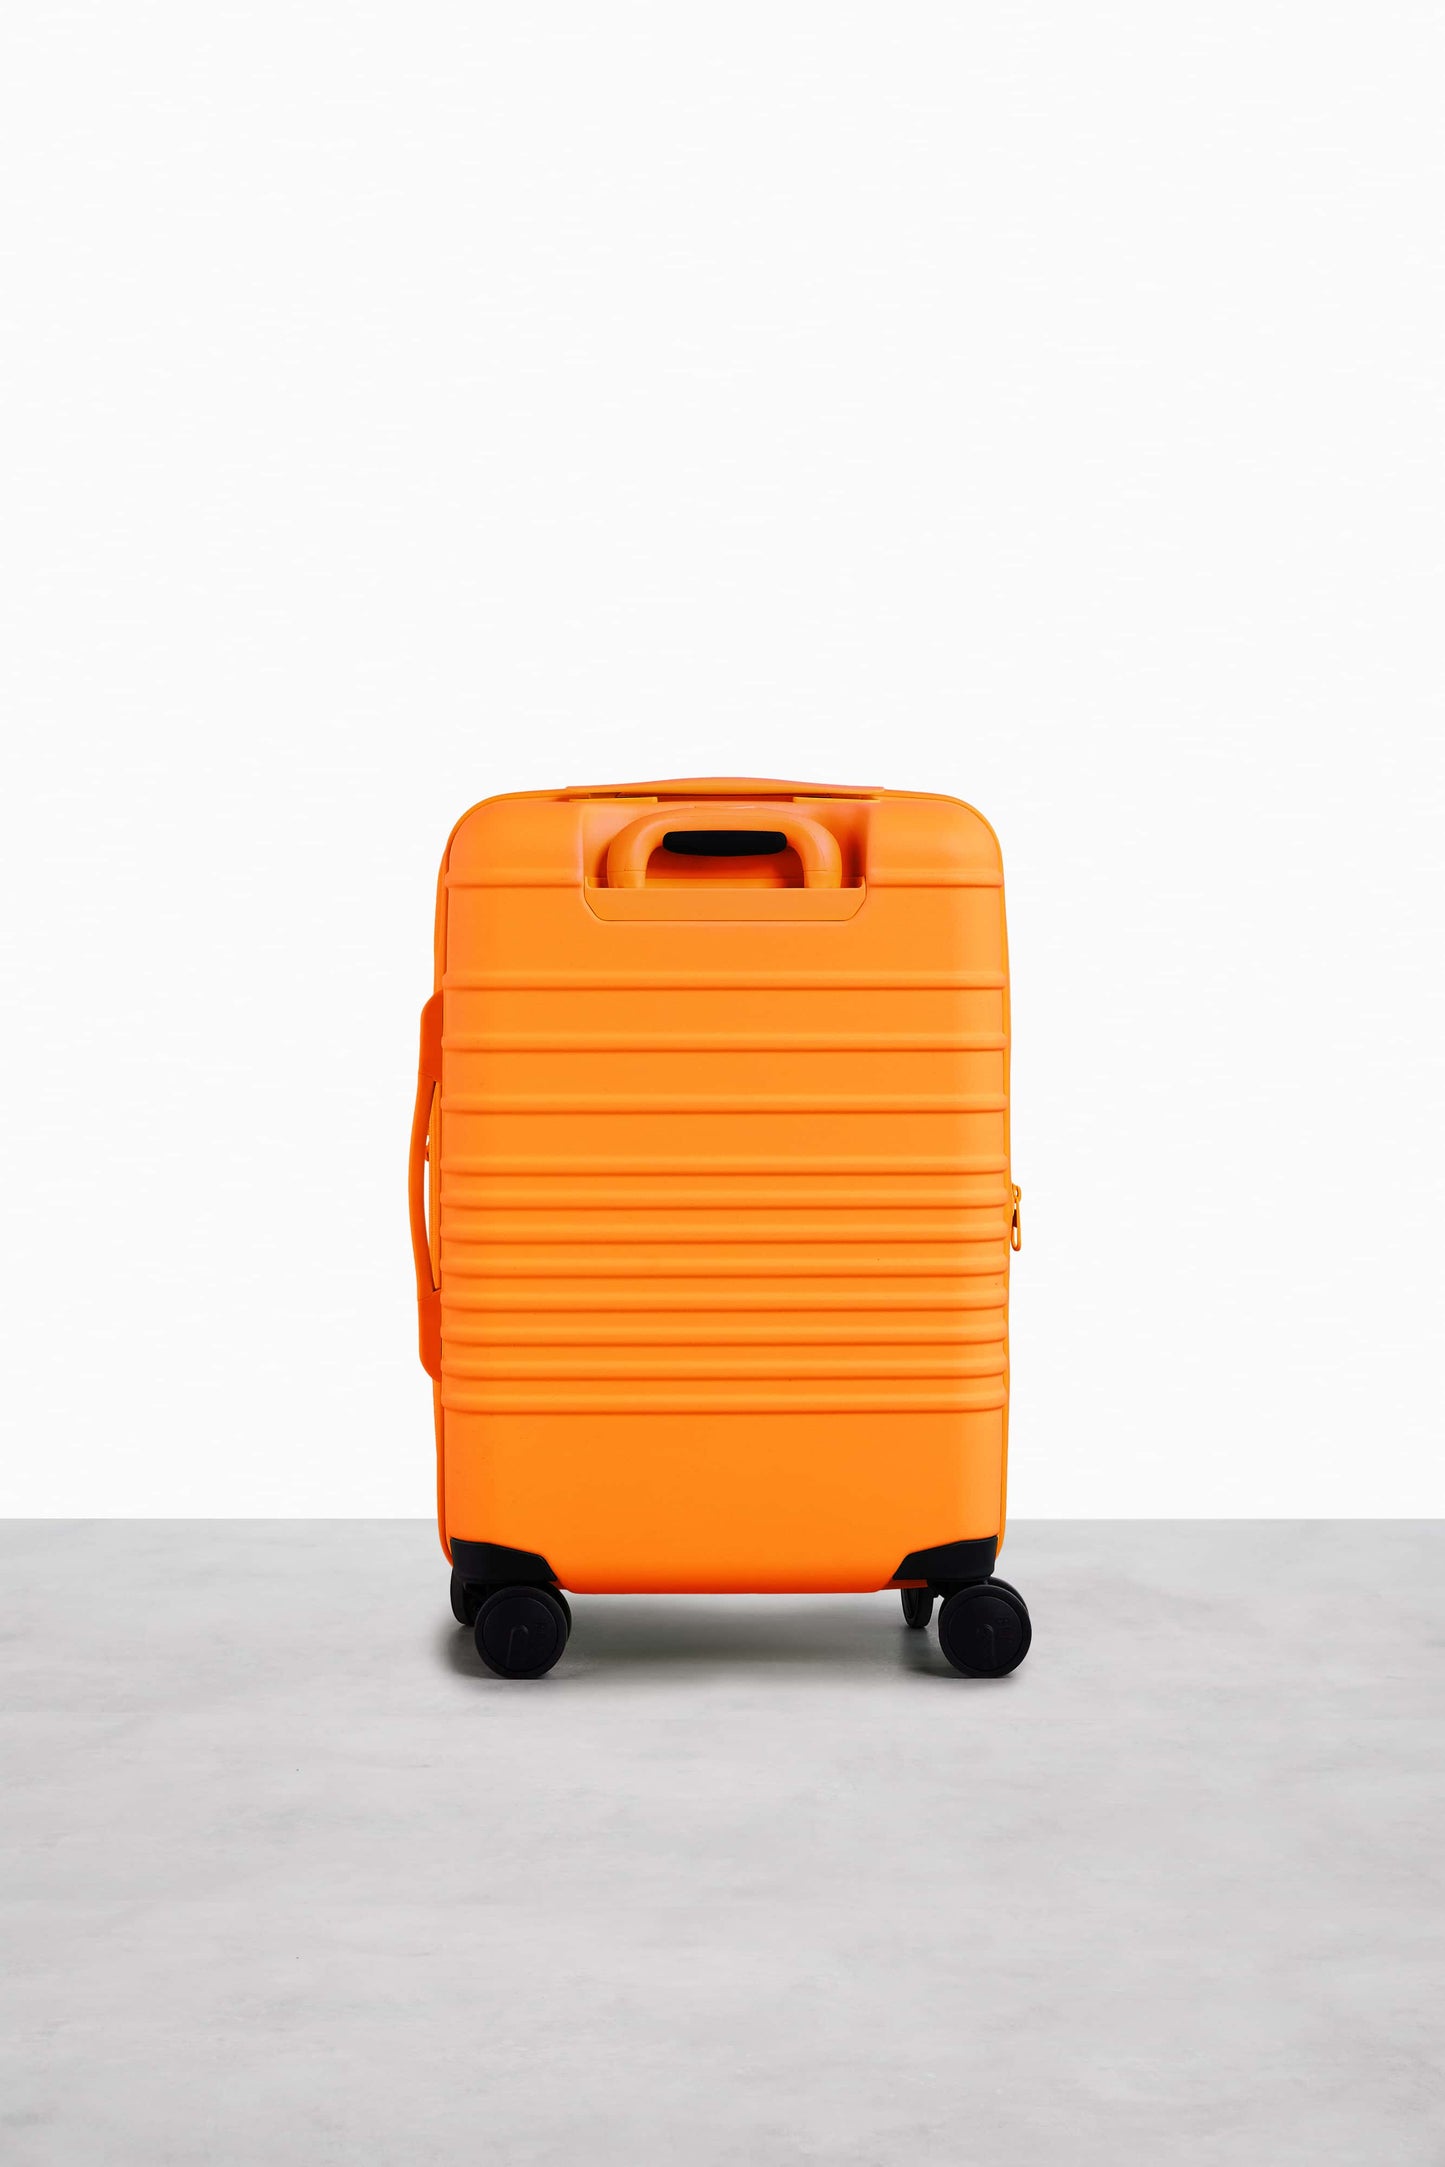 Le Carry-On Roller en Creamsicle